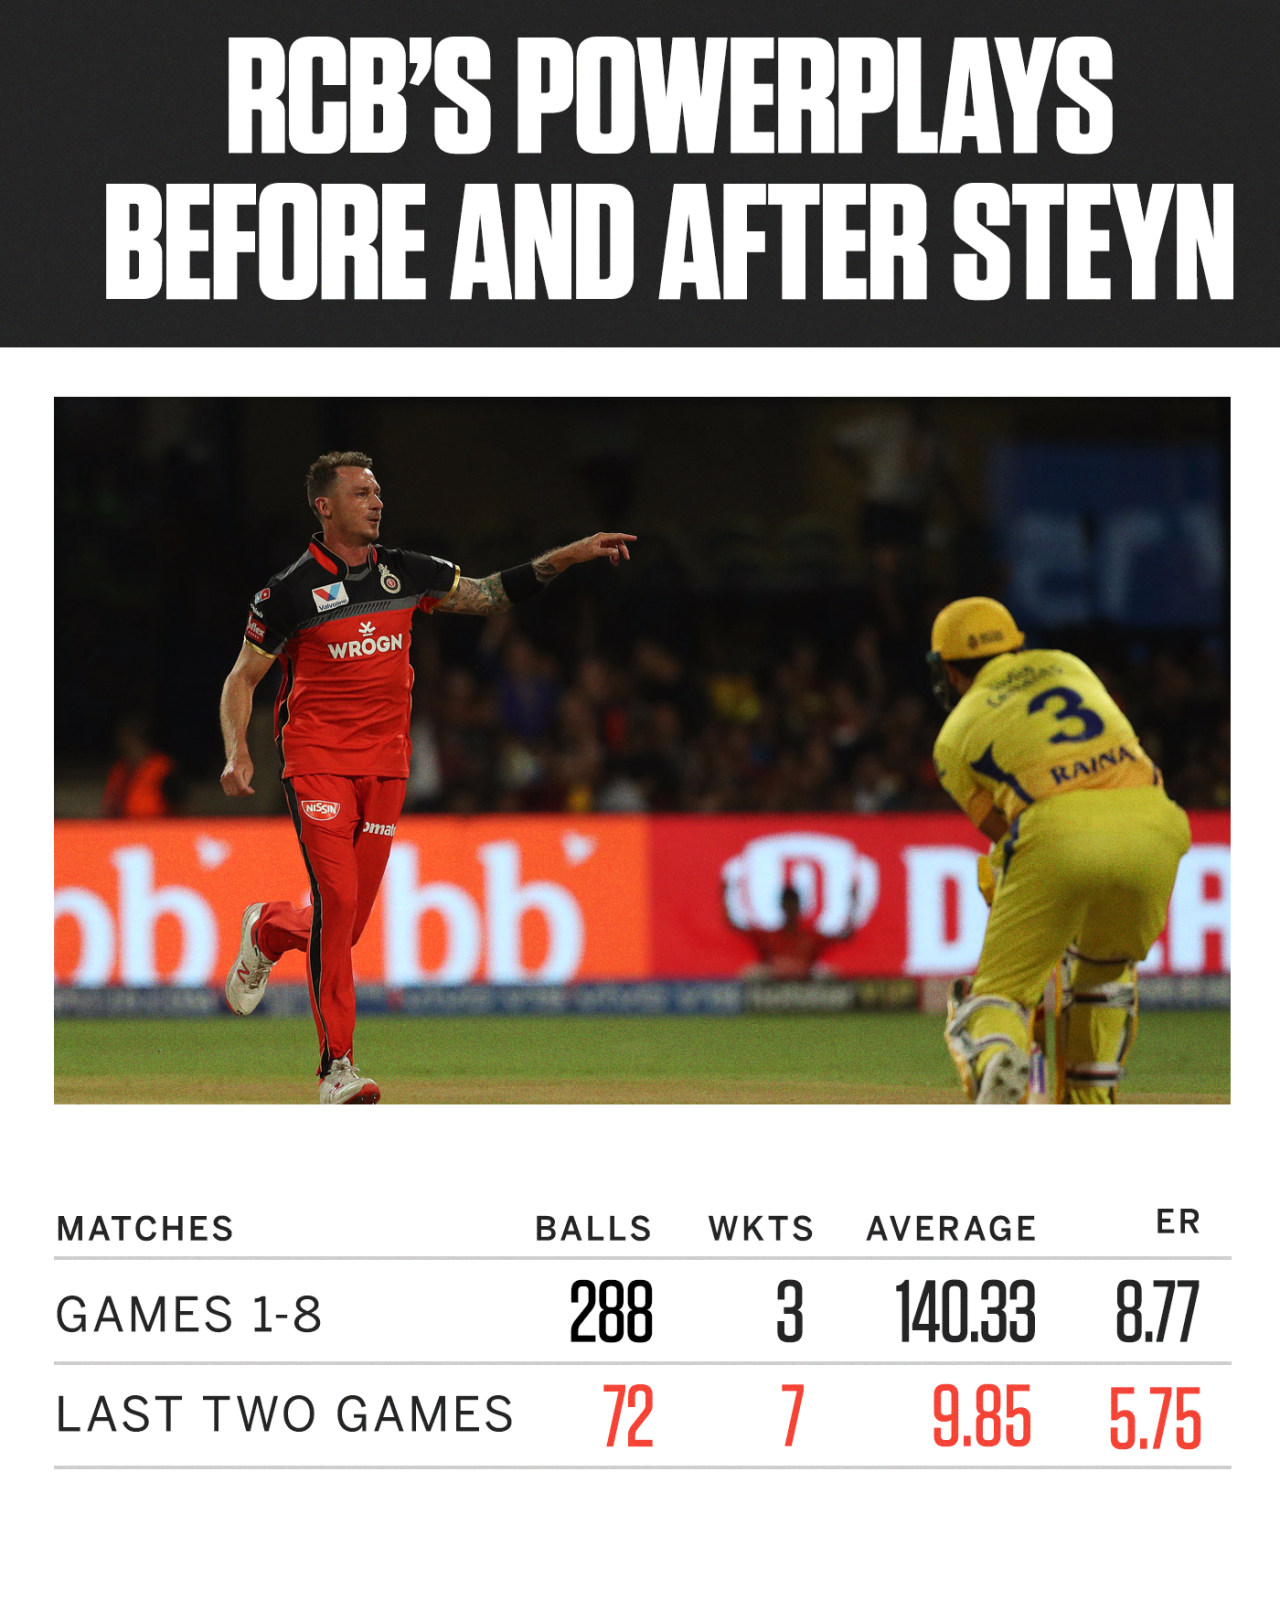 Dale Steyn's arrival has given Royal Challengers a welcome injection of new-ball potency